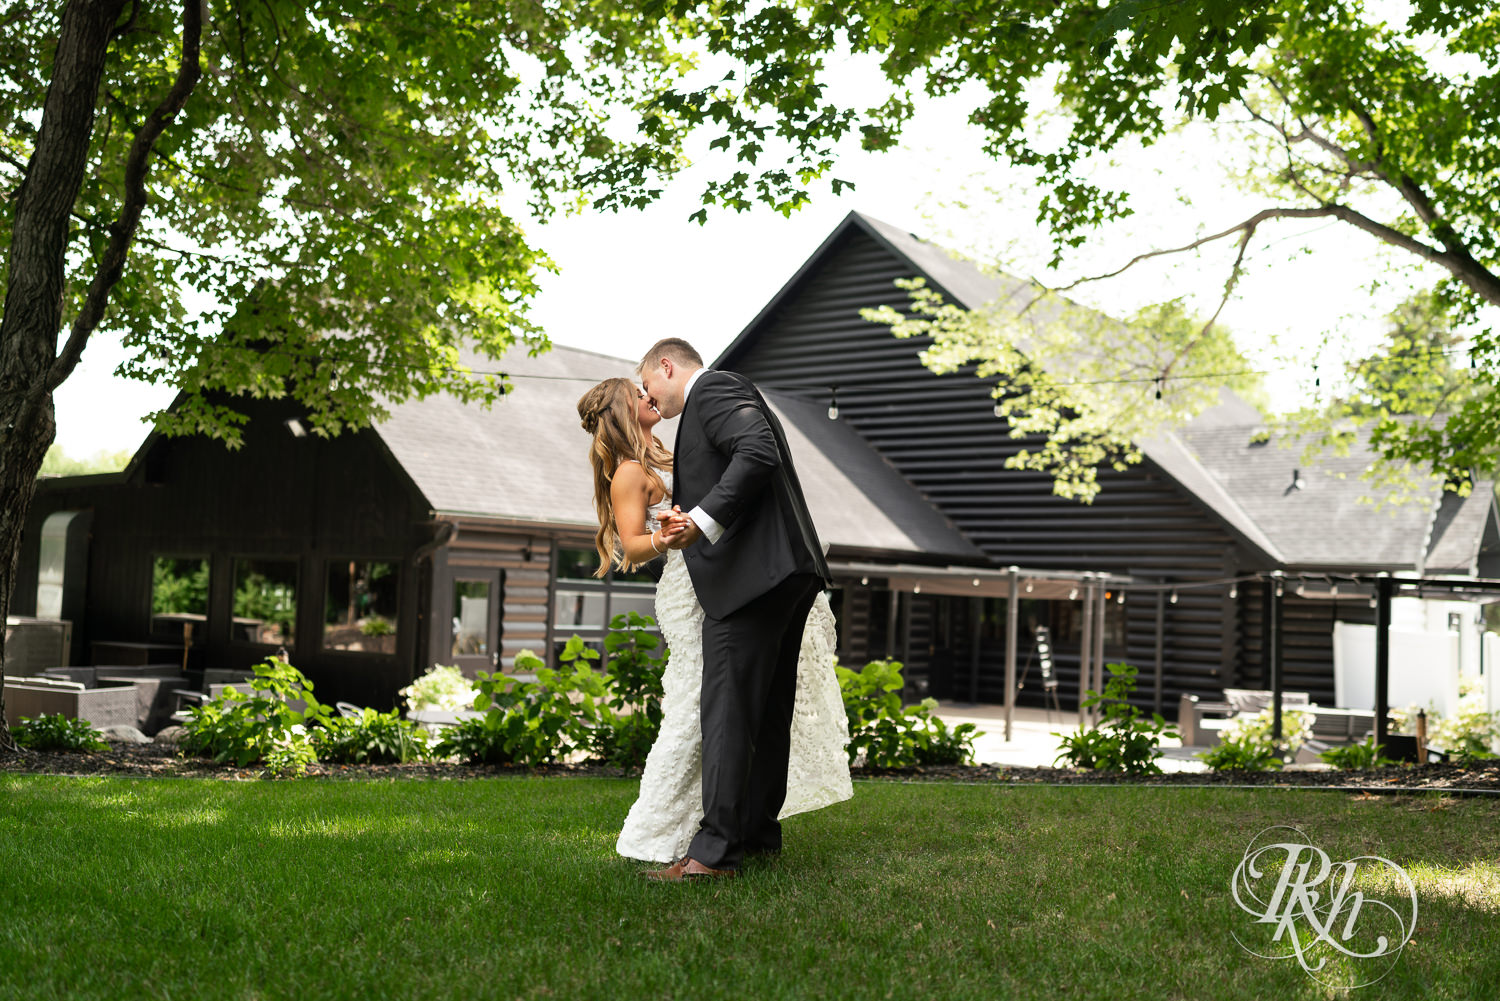 Bride and groom dance in the grass on wedding day at Ahavah Cottage in Elysian, Minnesota.